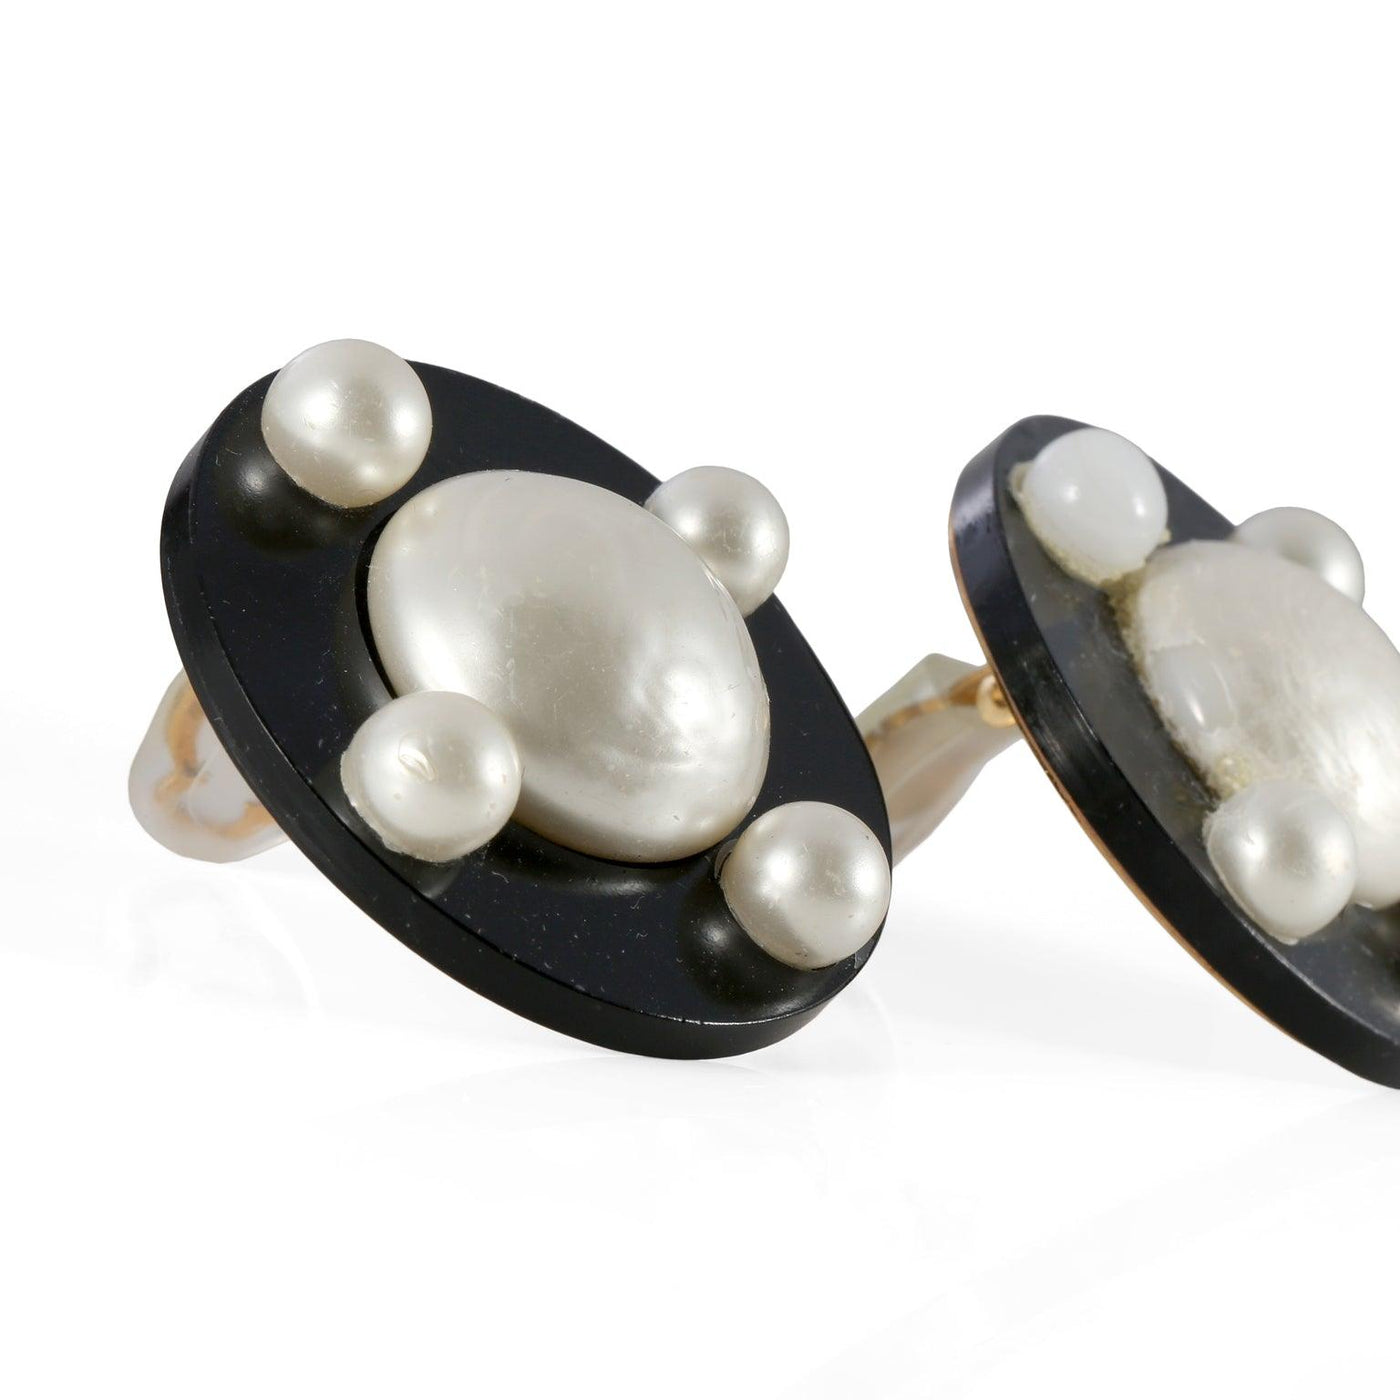 Chanel Black Resin and Pearl Earrings - Only Authentics